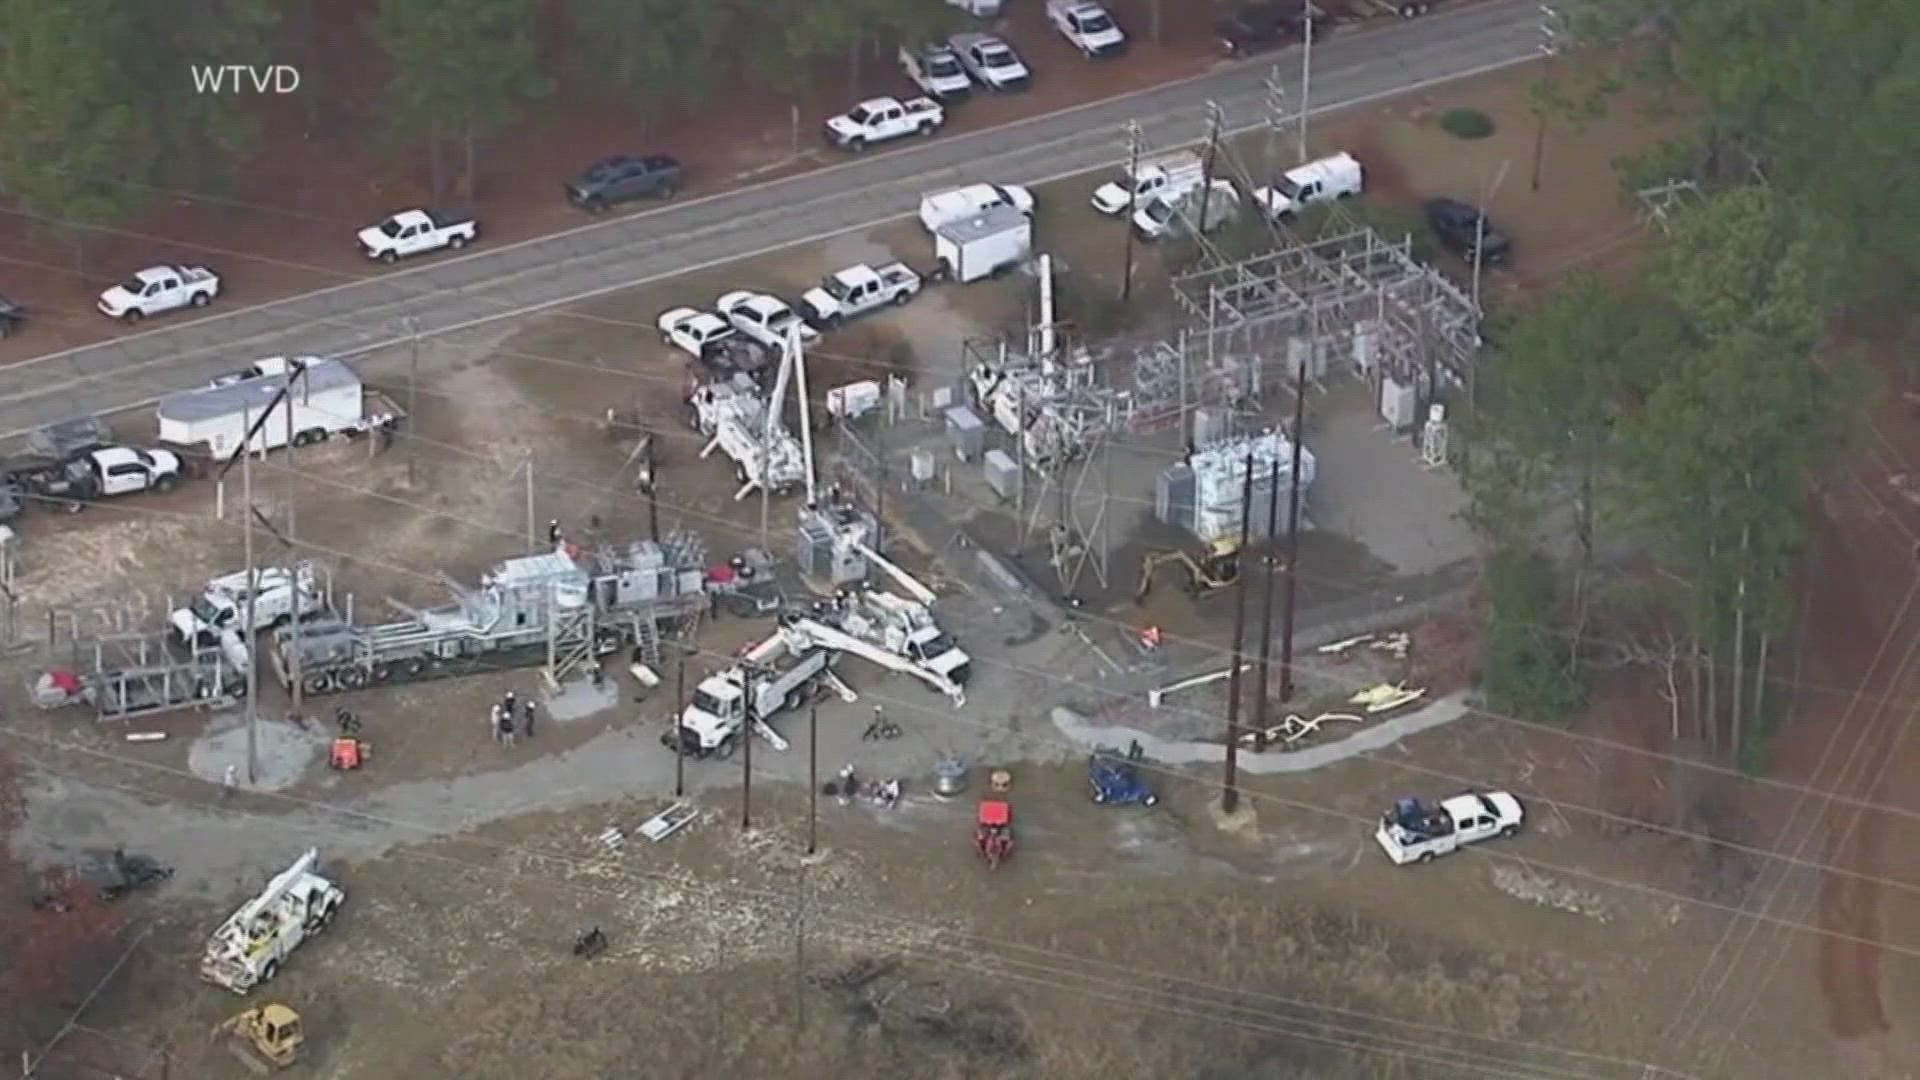 A $75,000 reward is up for grabs for information leading to the arrest of the person or people responsible for the destruction of utility substations in Moore County